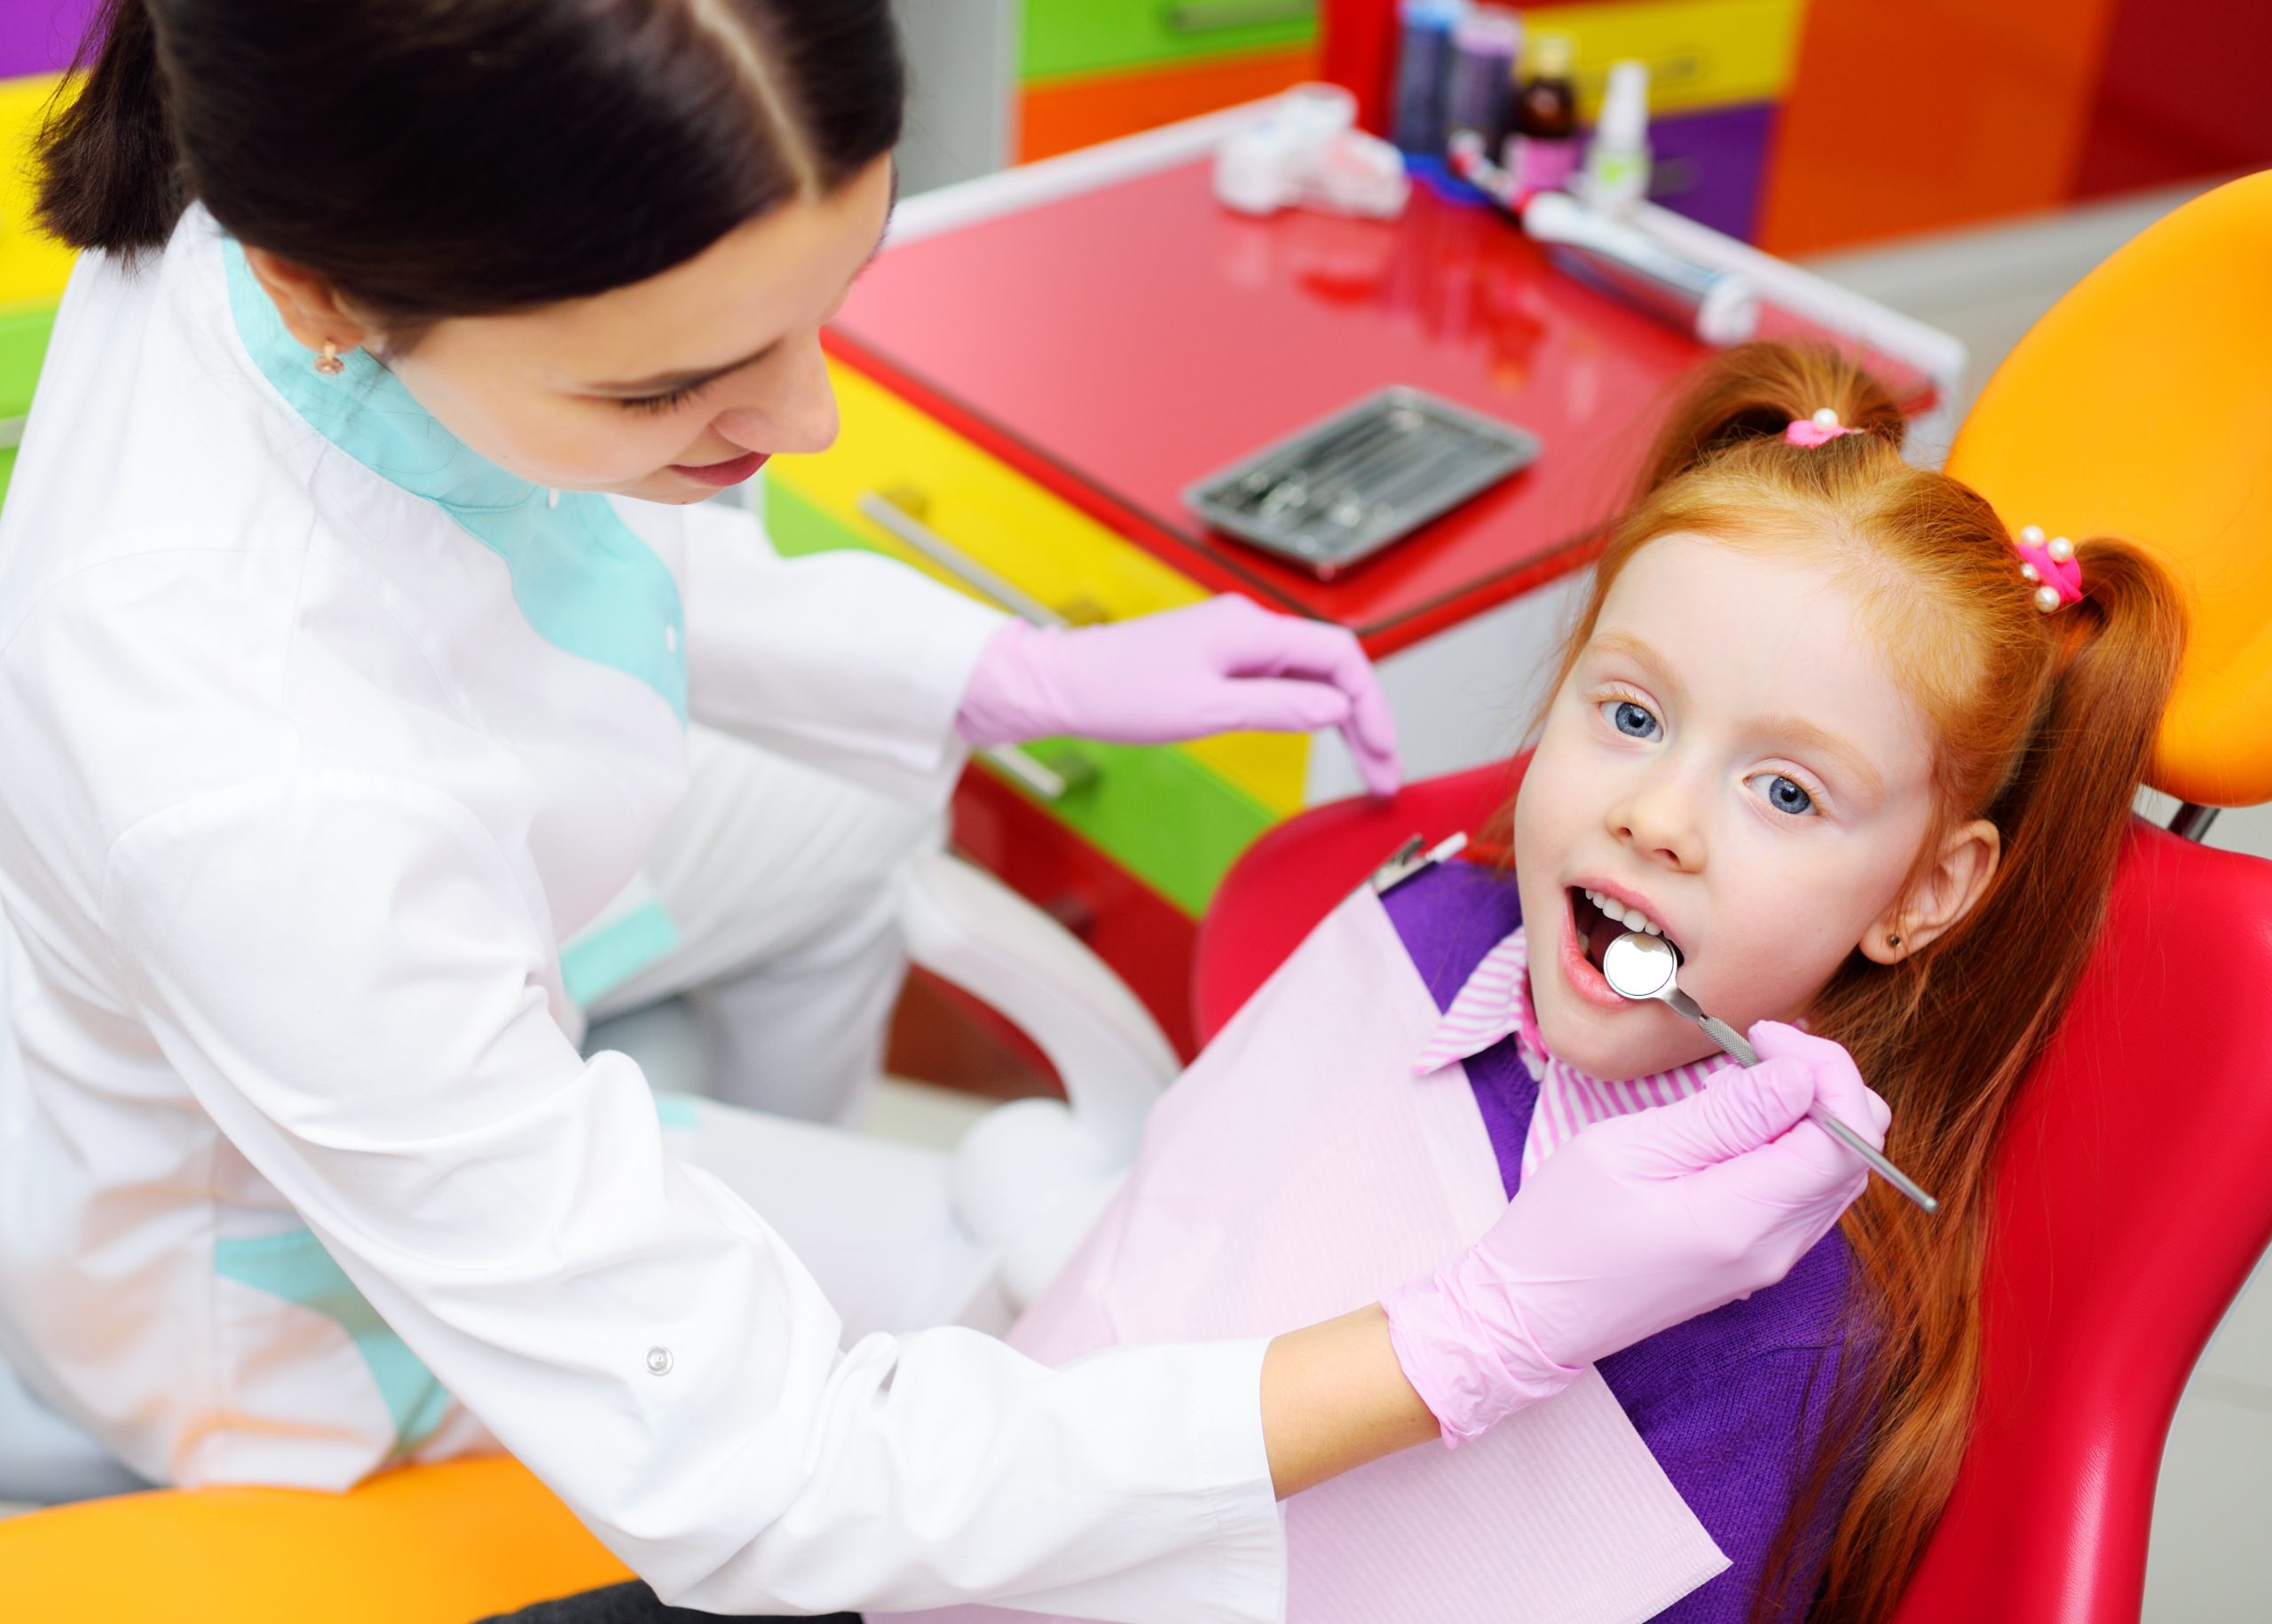 children's dentist examines the teeth and mouth of the child - a cute red-haired girl sitting in a dental chair. Pediatric dentistry